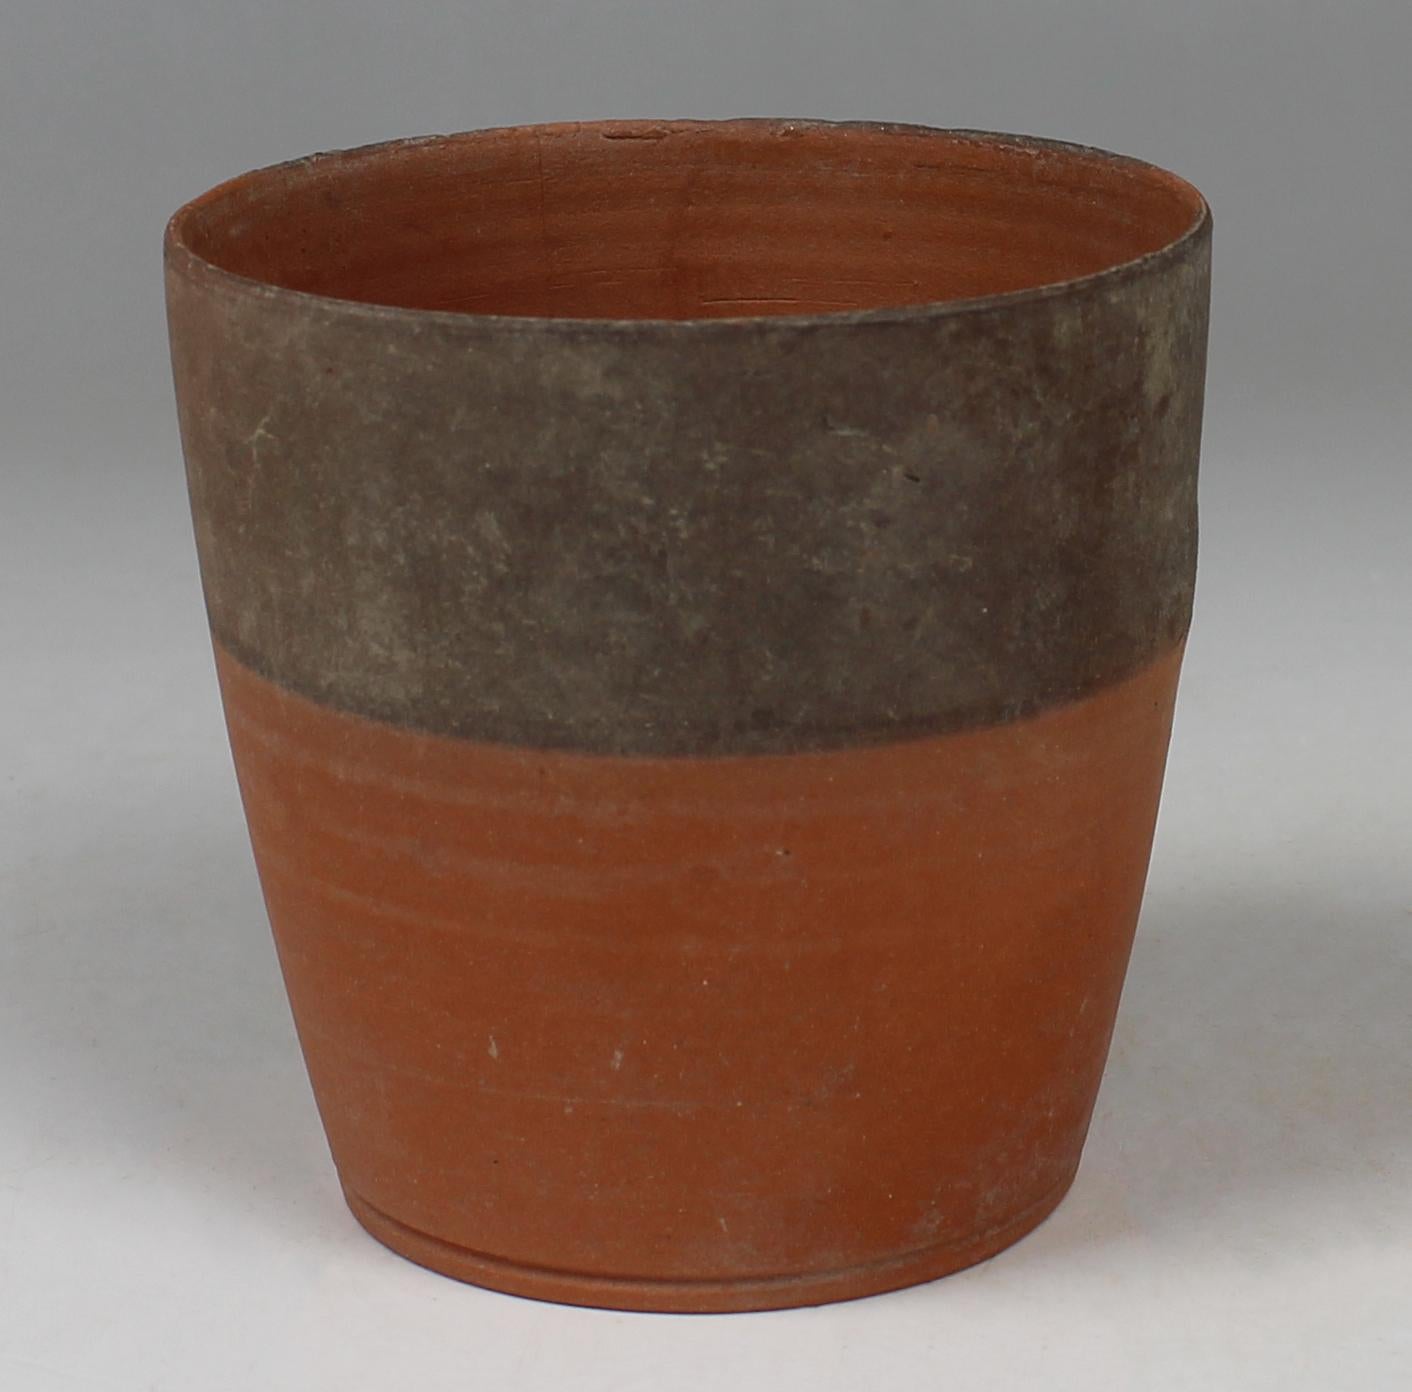 ITEM: Cylindrical beaker
MATERIAL: Pottery
CULTURE: Greek, Hellenistic Period
PERIOD: 3rd – 1st Century B.C
DIMENSIONS: 75 mm x 76 mm
CONDITION: Good condition
PROVENANCE: Ex German private collection, B. K., in Germany since before 1950.

Comes